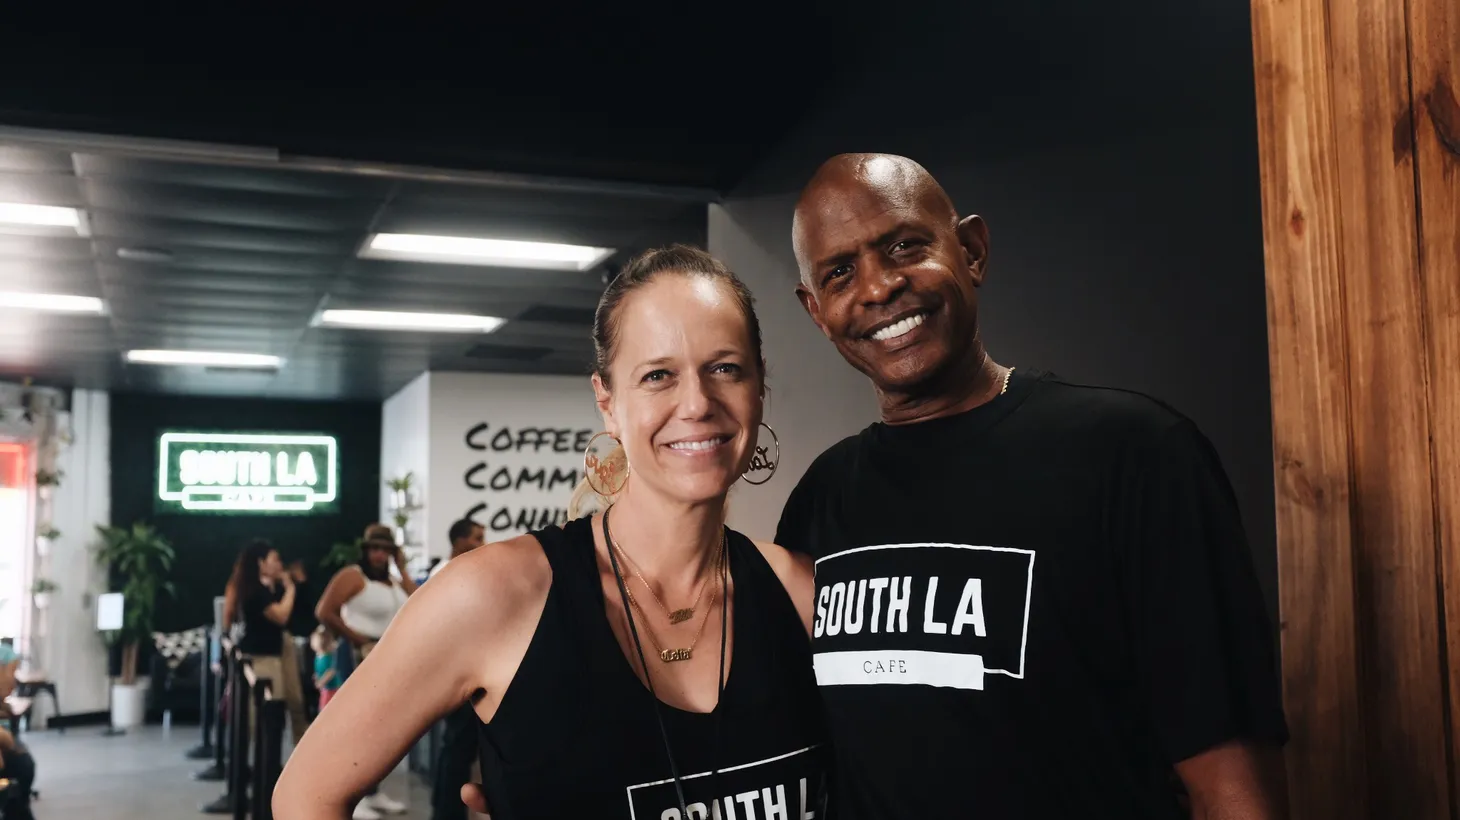 Joe and Celia Ward-Wallace grew up in the neighborhood where they opened South LA Cafe, bringing healthy food and creating a community hub.